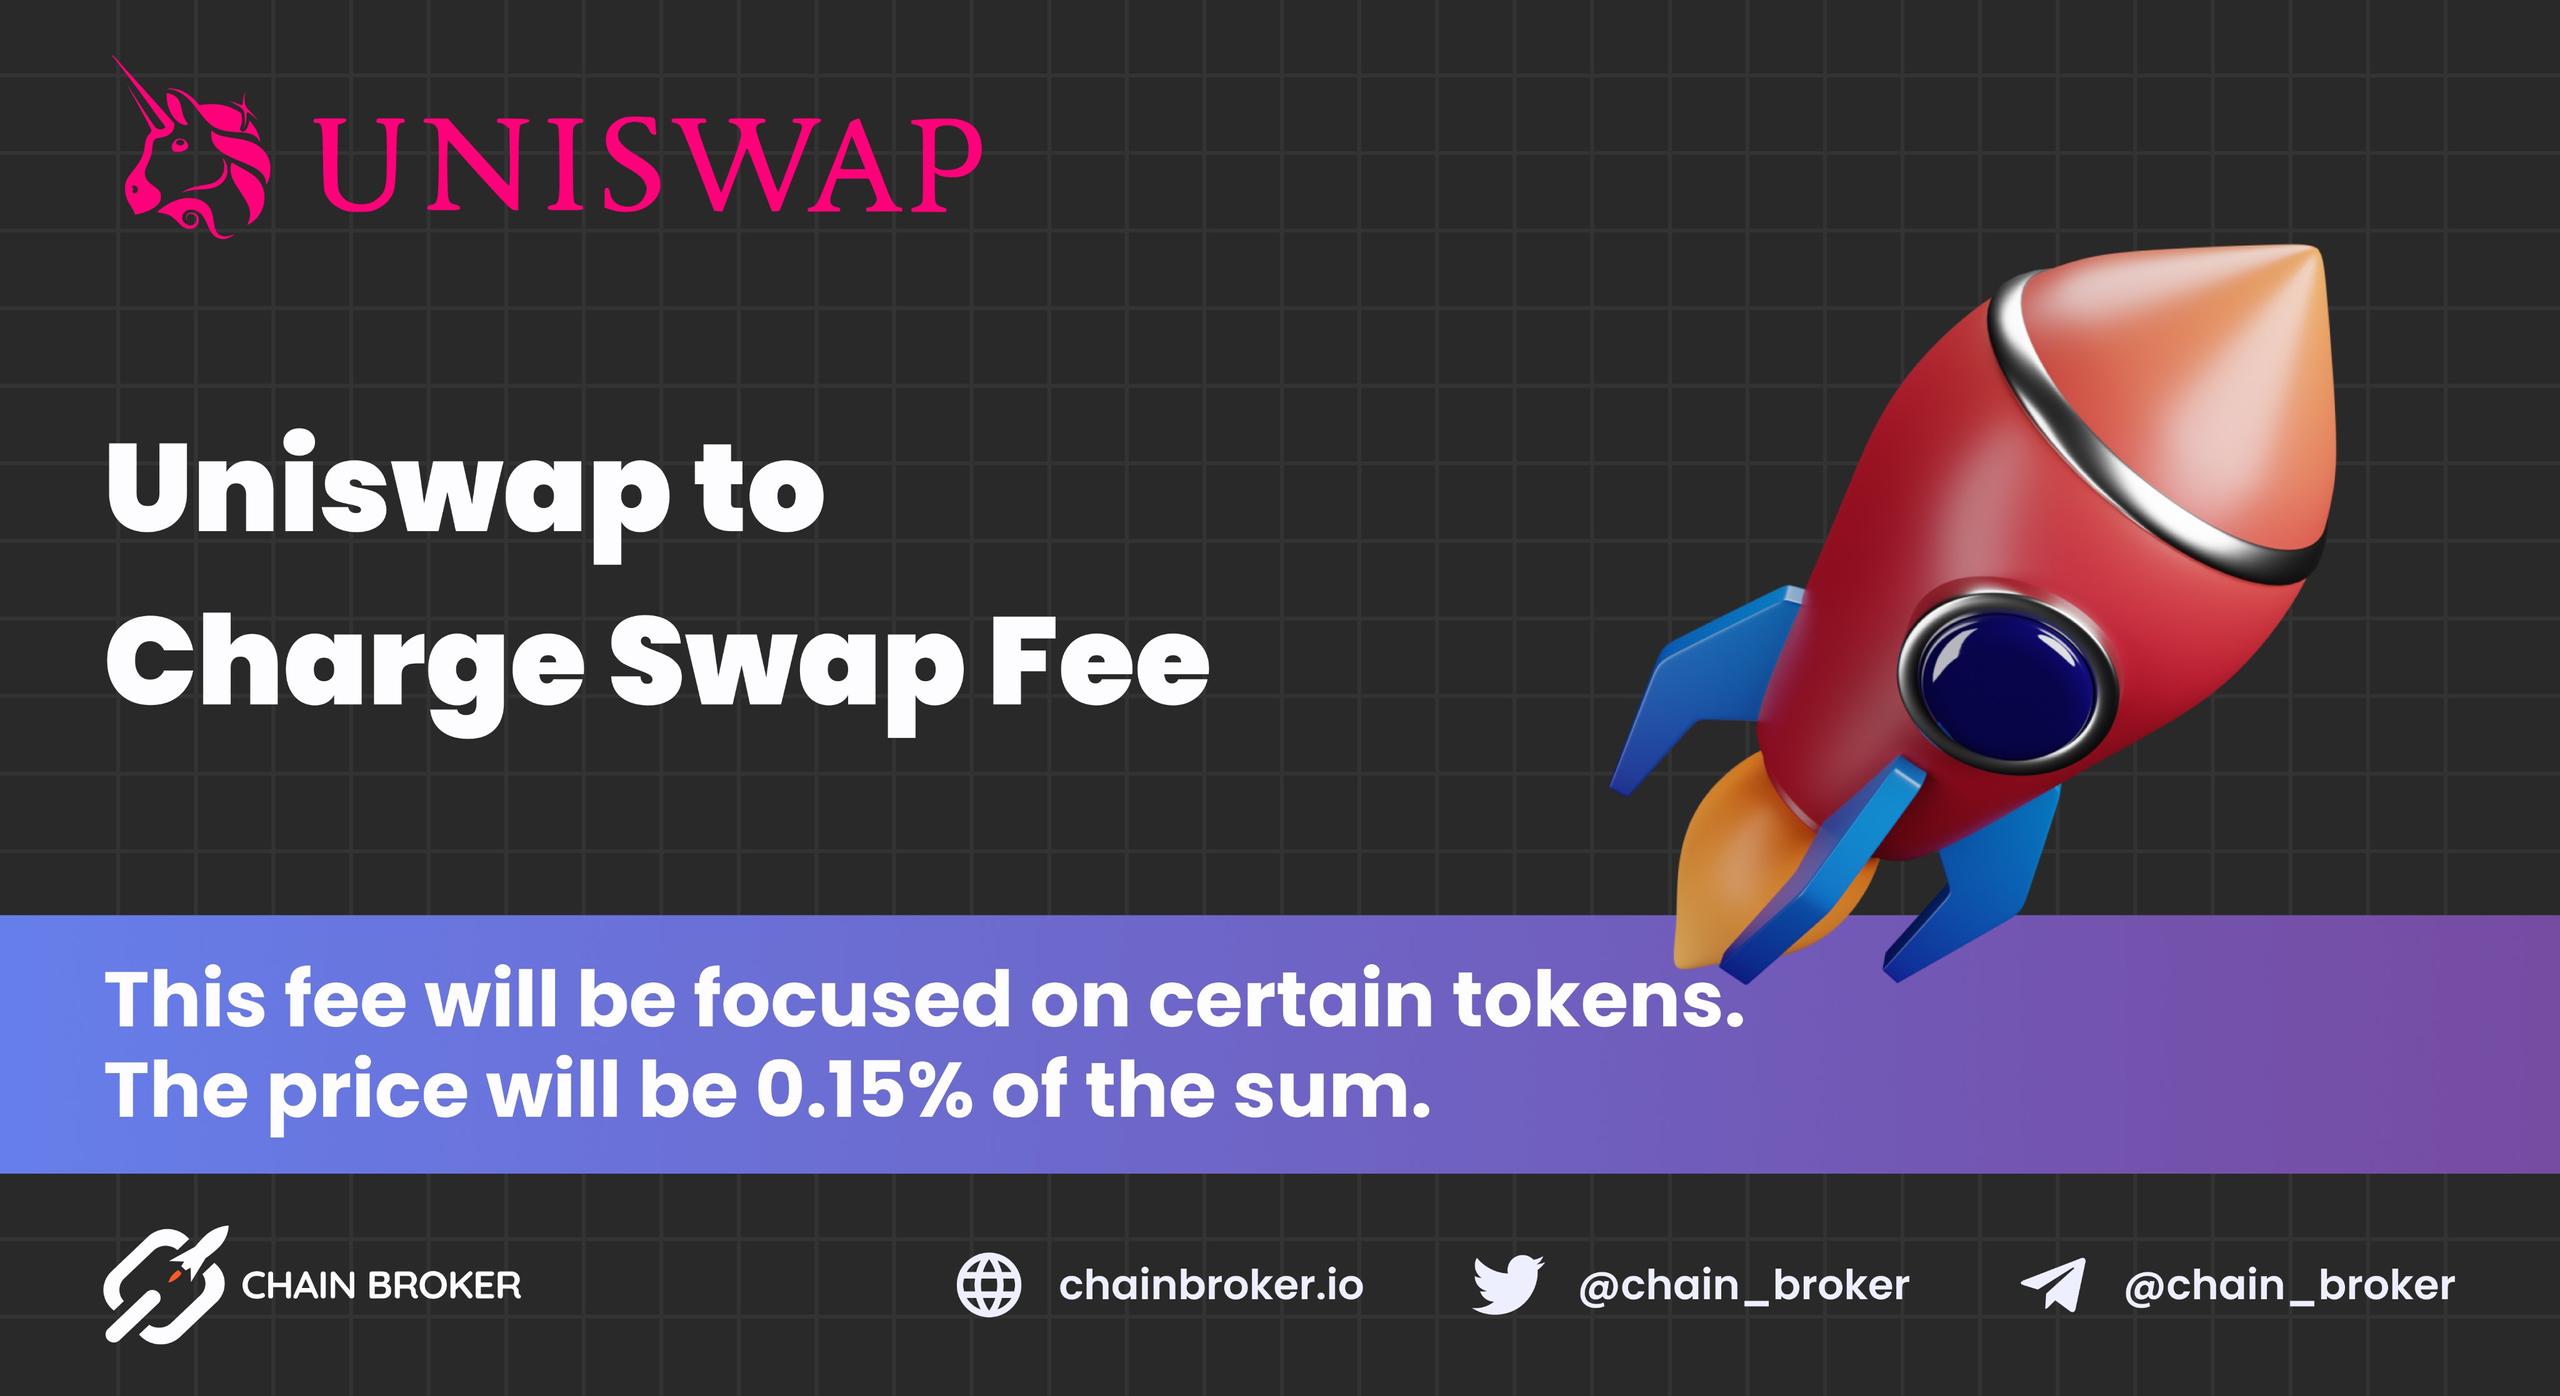 Uniswap now will charge swap fee on certain tokens